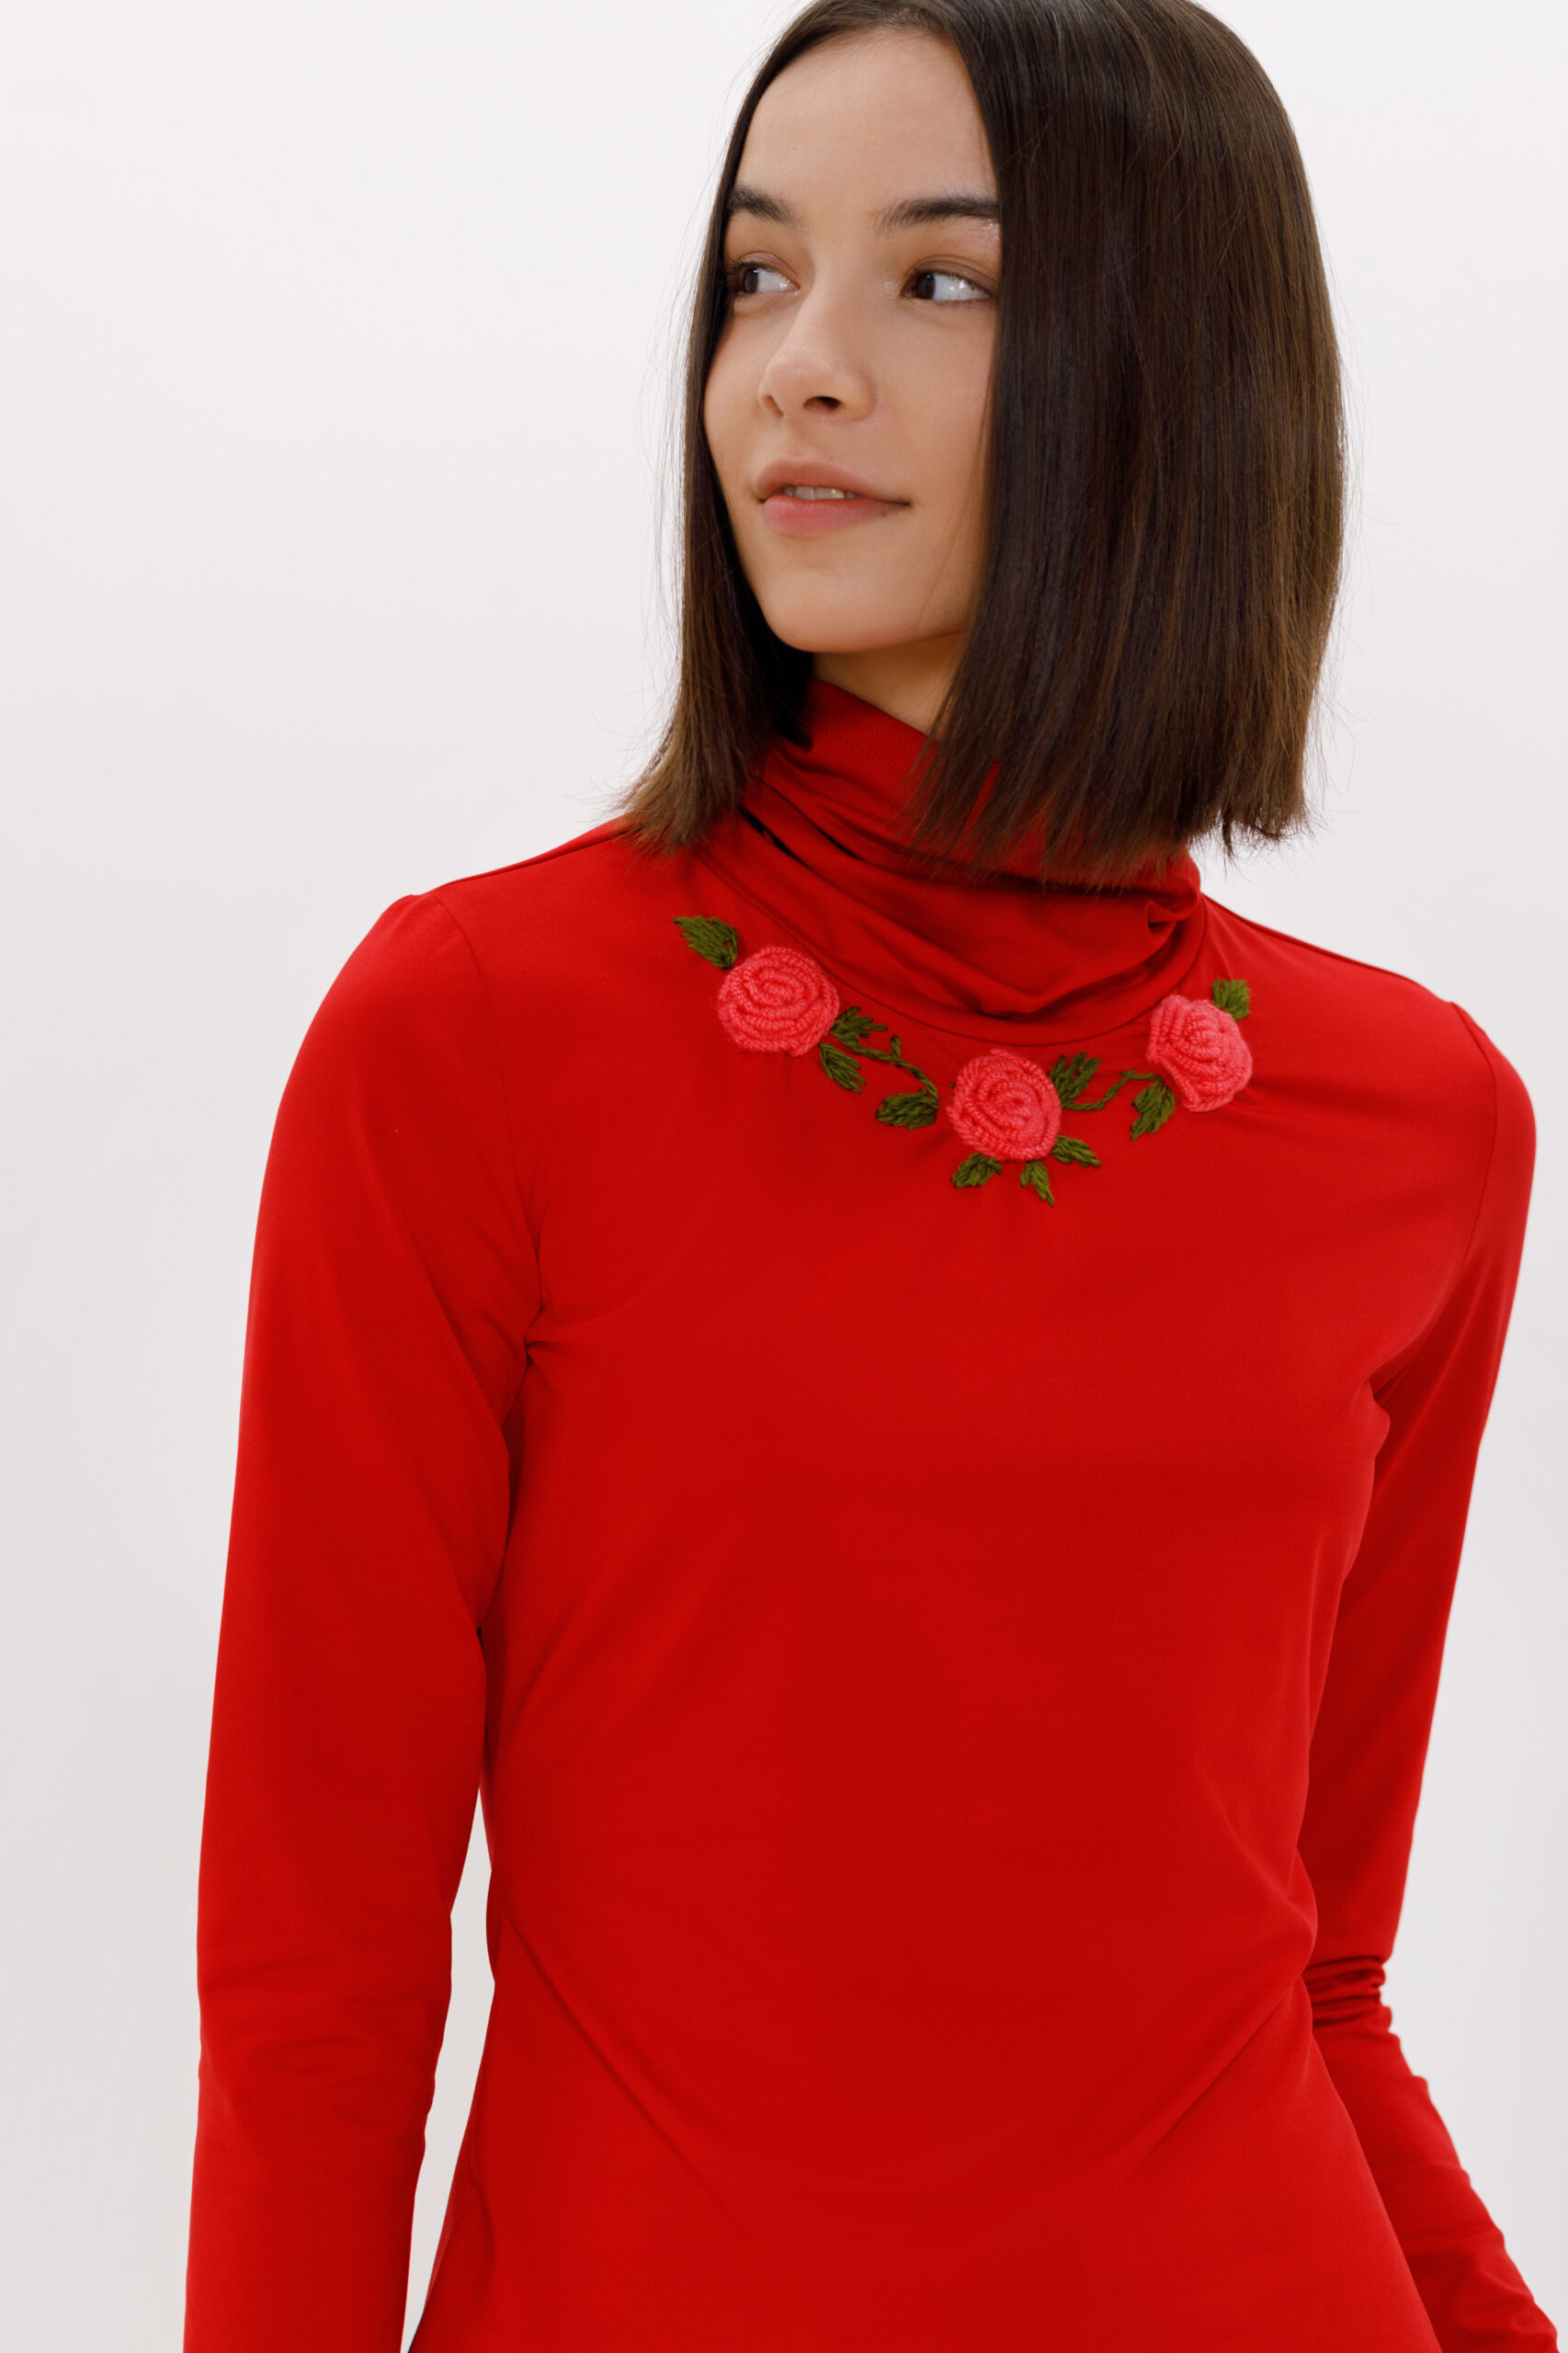 XENI 1 red jersey turtleneck with embroidery chain. Natural fabrics, original design, handmade embroidery